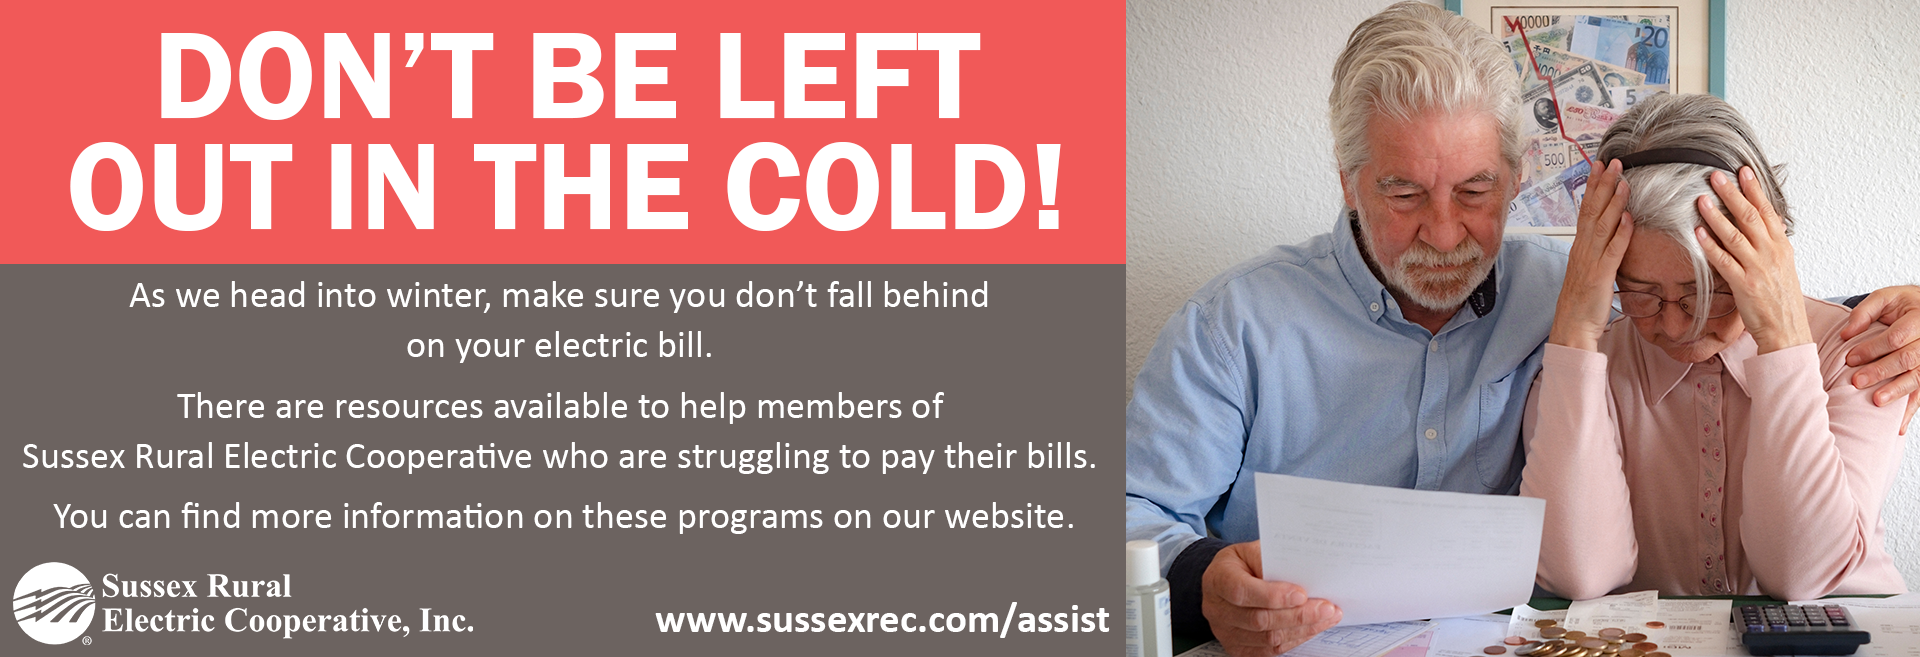 DON'T BE LEFT OUT IN THE COLD! As we head into winter, make sure you don't fall behind on your electric bill. There are resources available to help members of Sussex Rural Electric Cooperative who are struggling to pay their bills. You can find more information on these programs on our website. www.sussexrec.com/assist